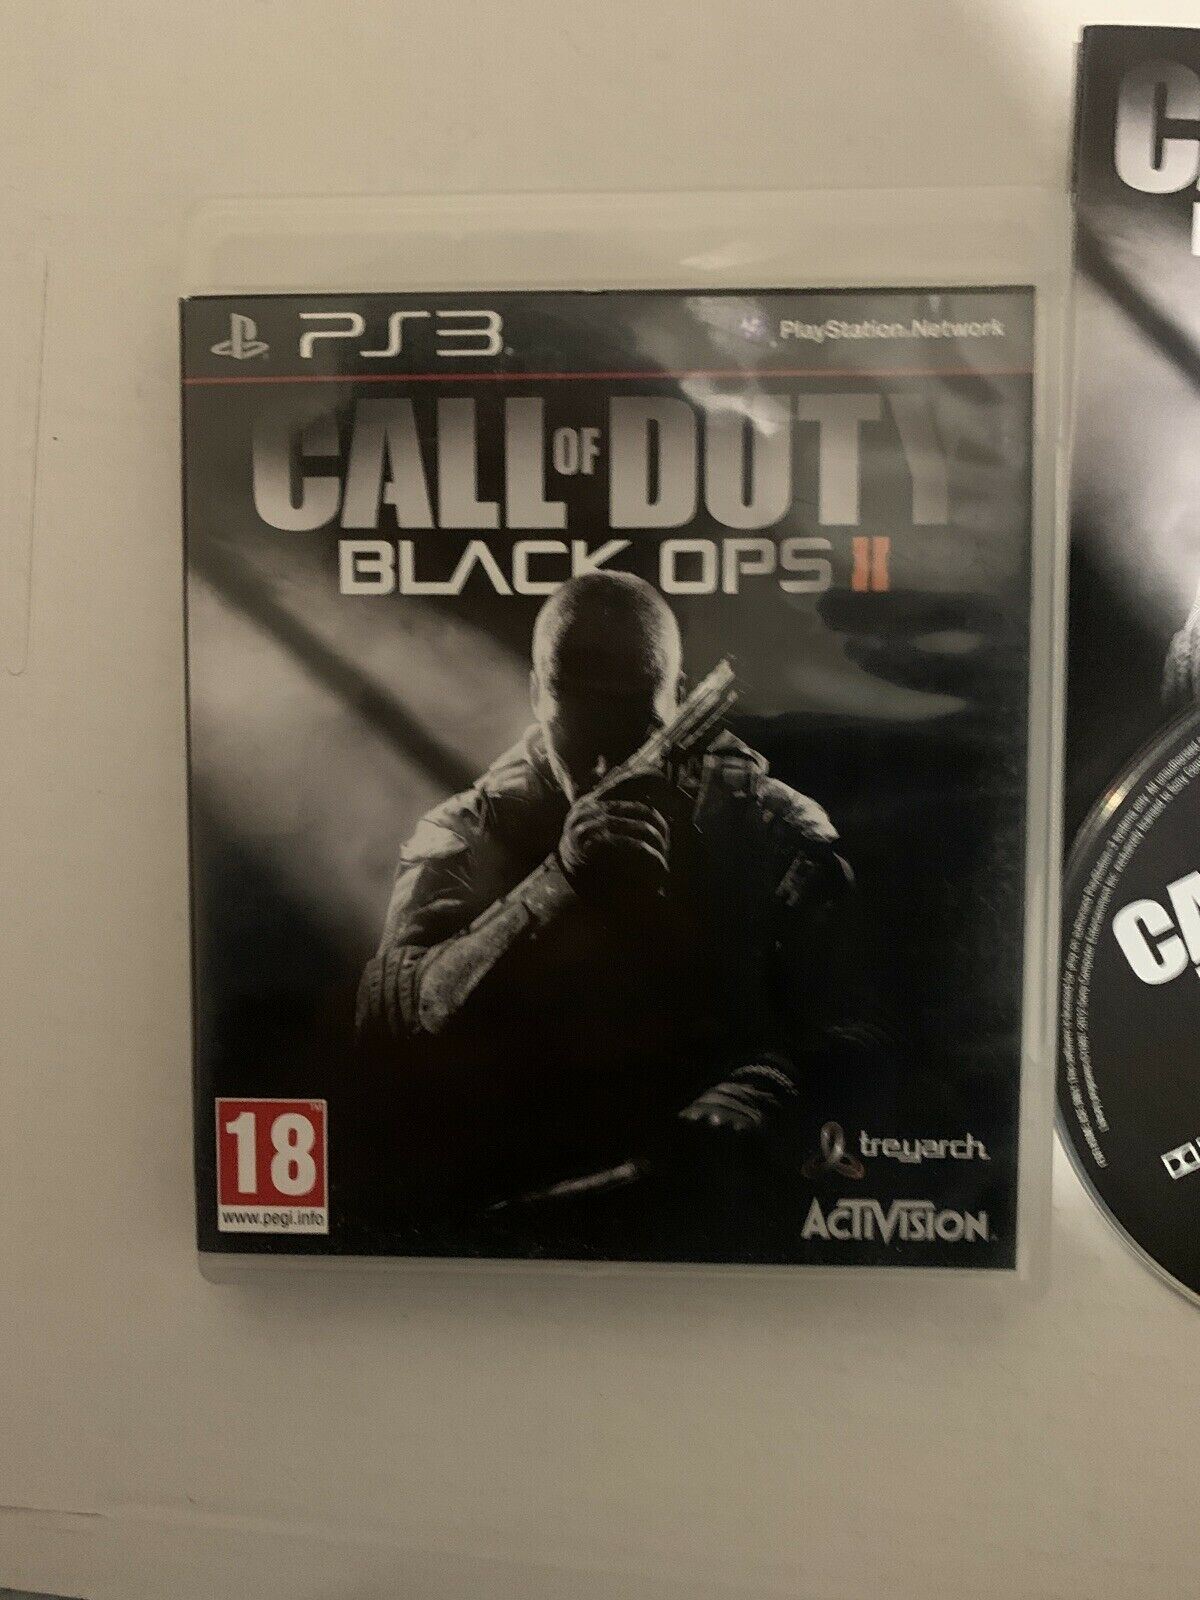 Call of Duty Black Ops II (2012) Playstation 3 Multiplayer FPS - PS3 w Manual